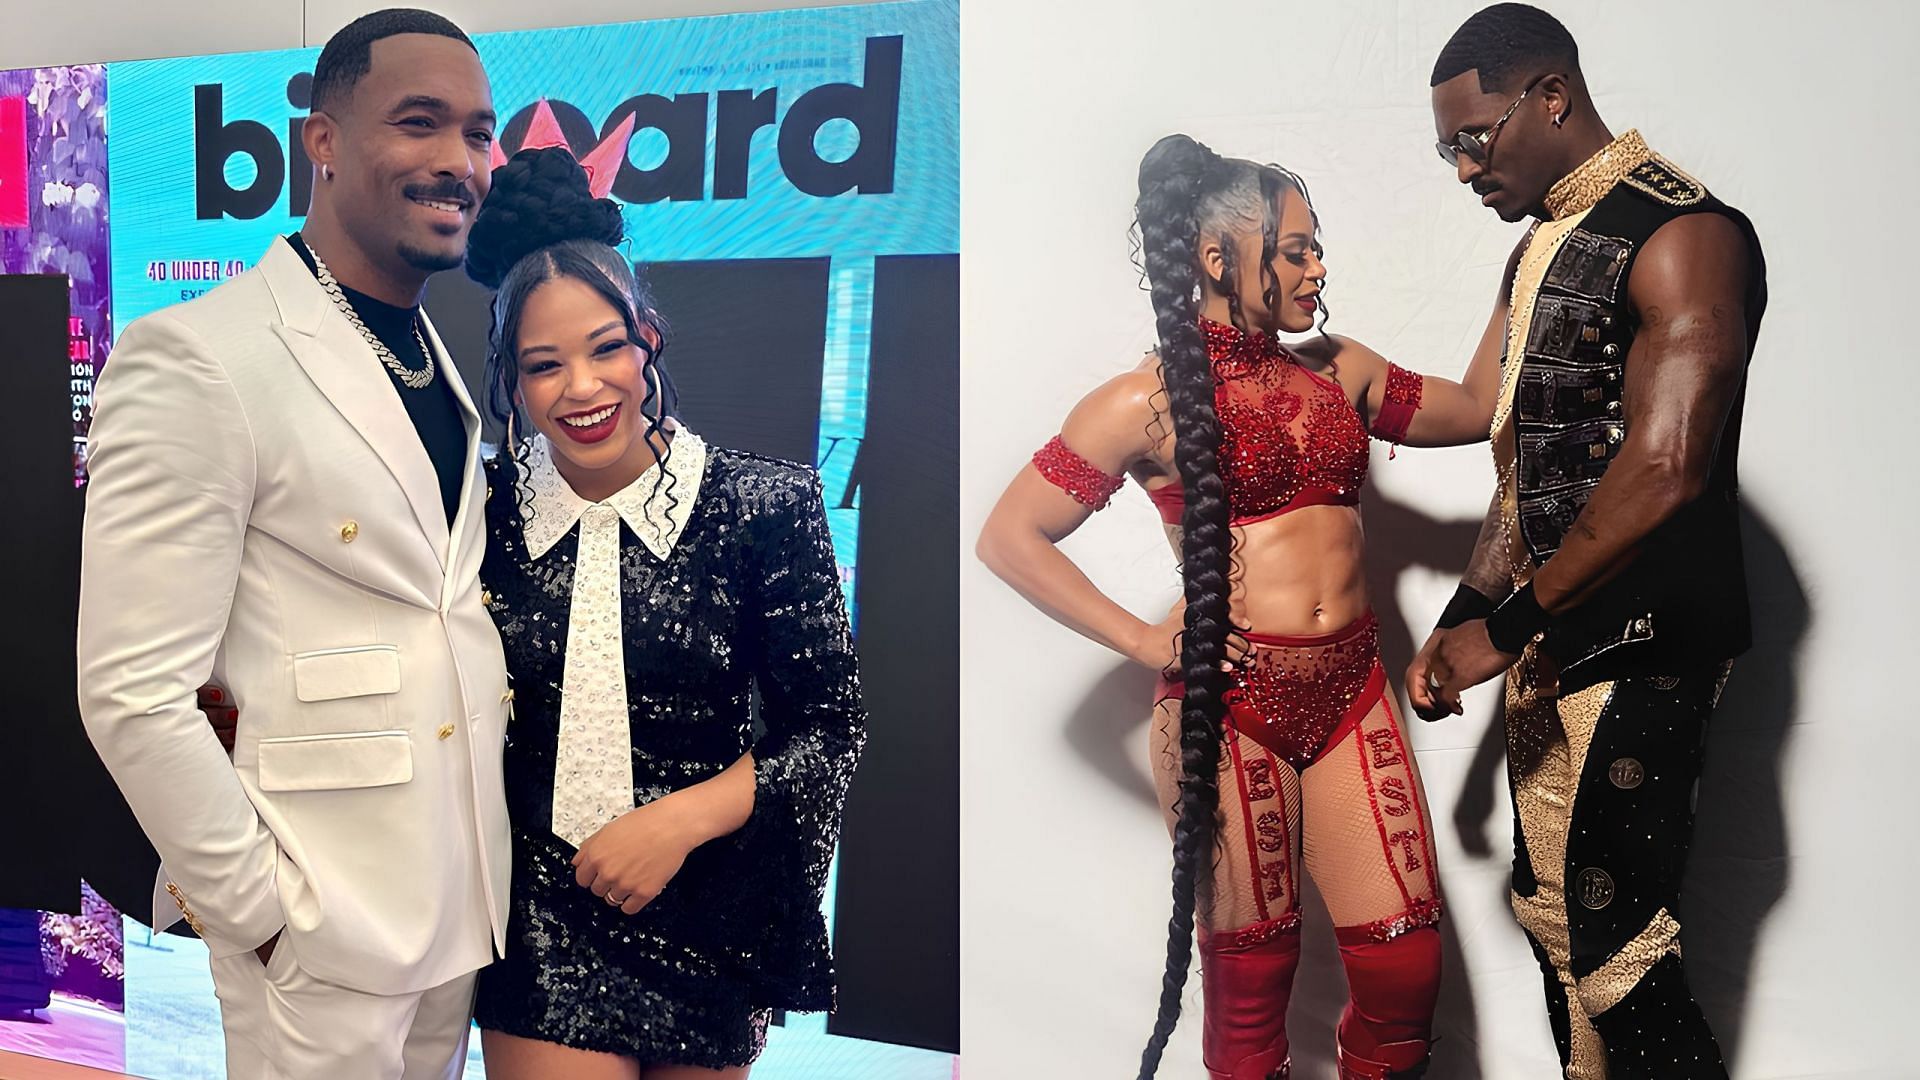 Bianca Belair and Montez Ford have been married for 5 years 